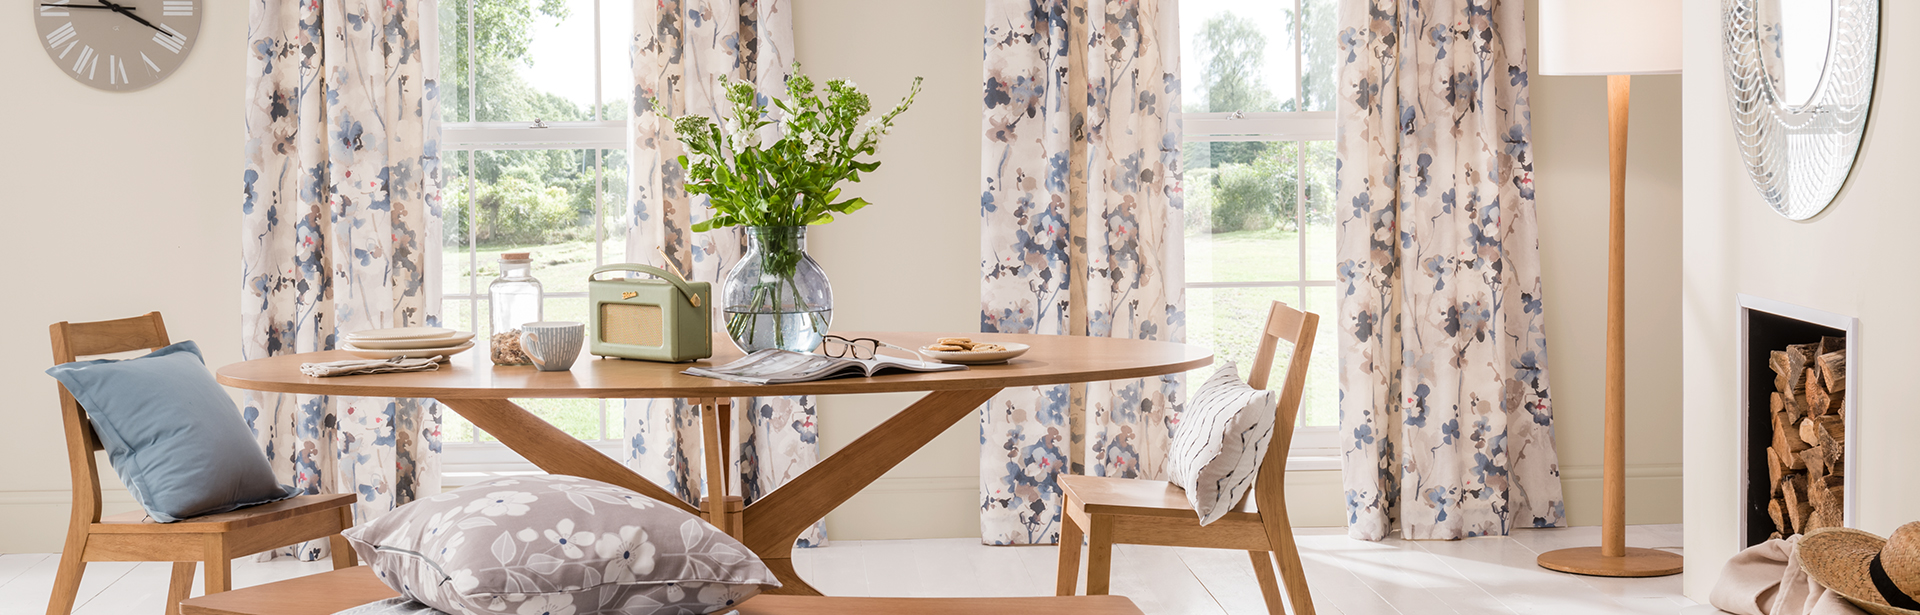 A Fresh New Look with The Snug Company Curtains